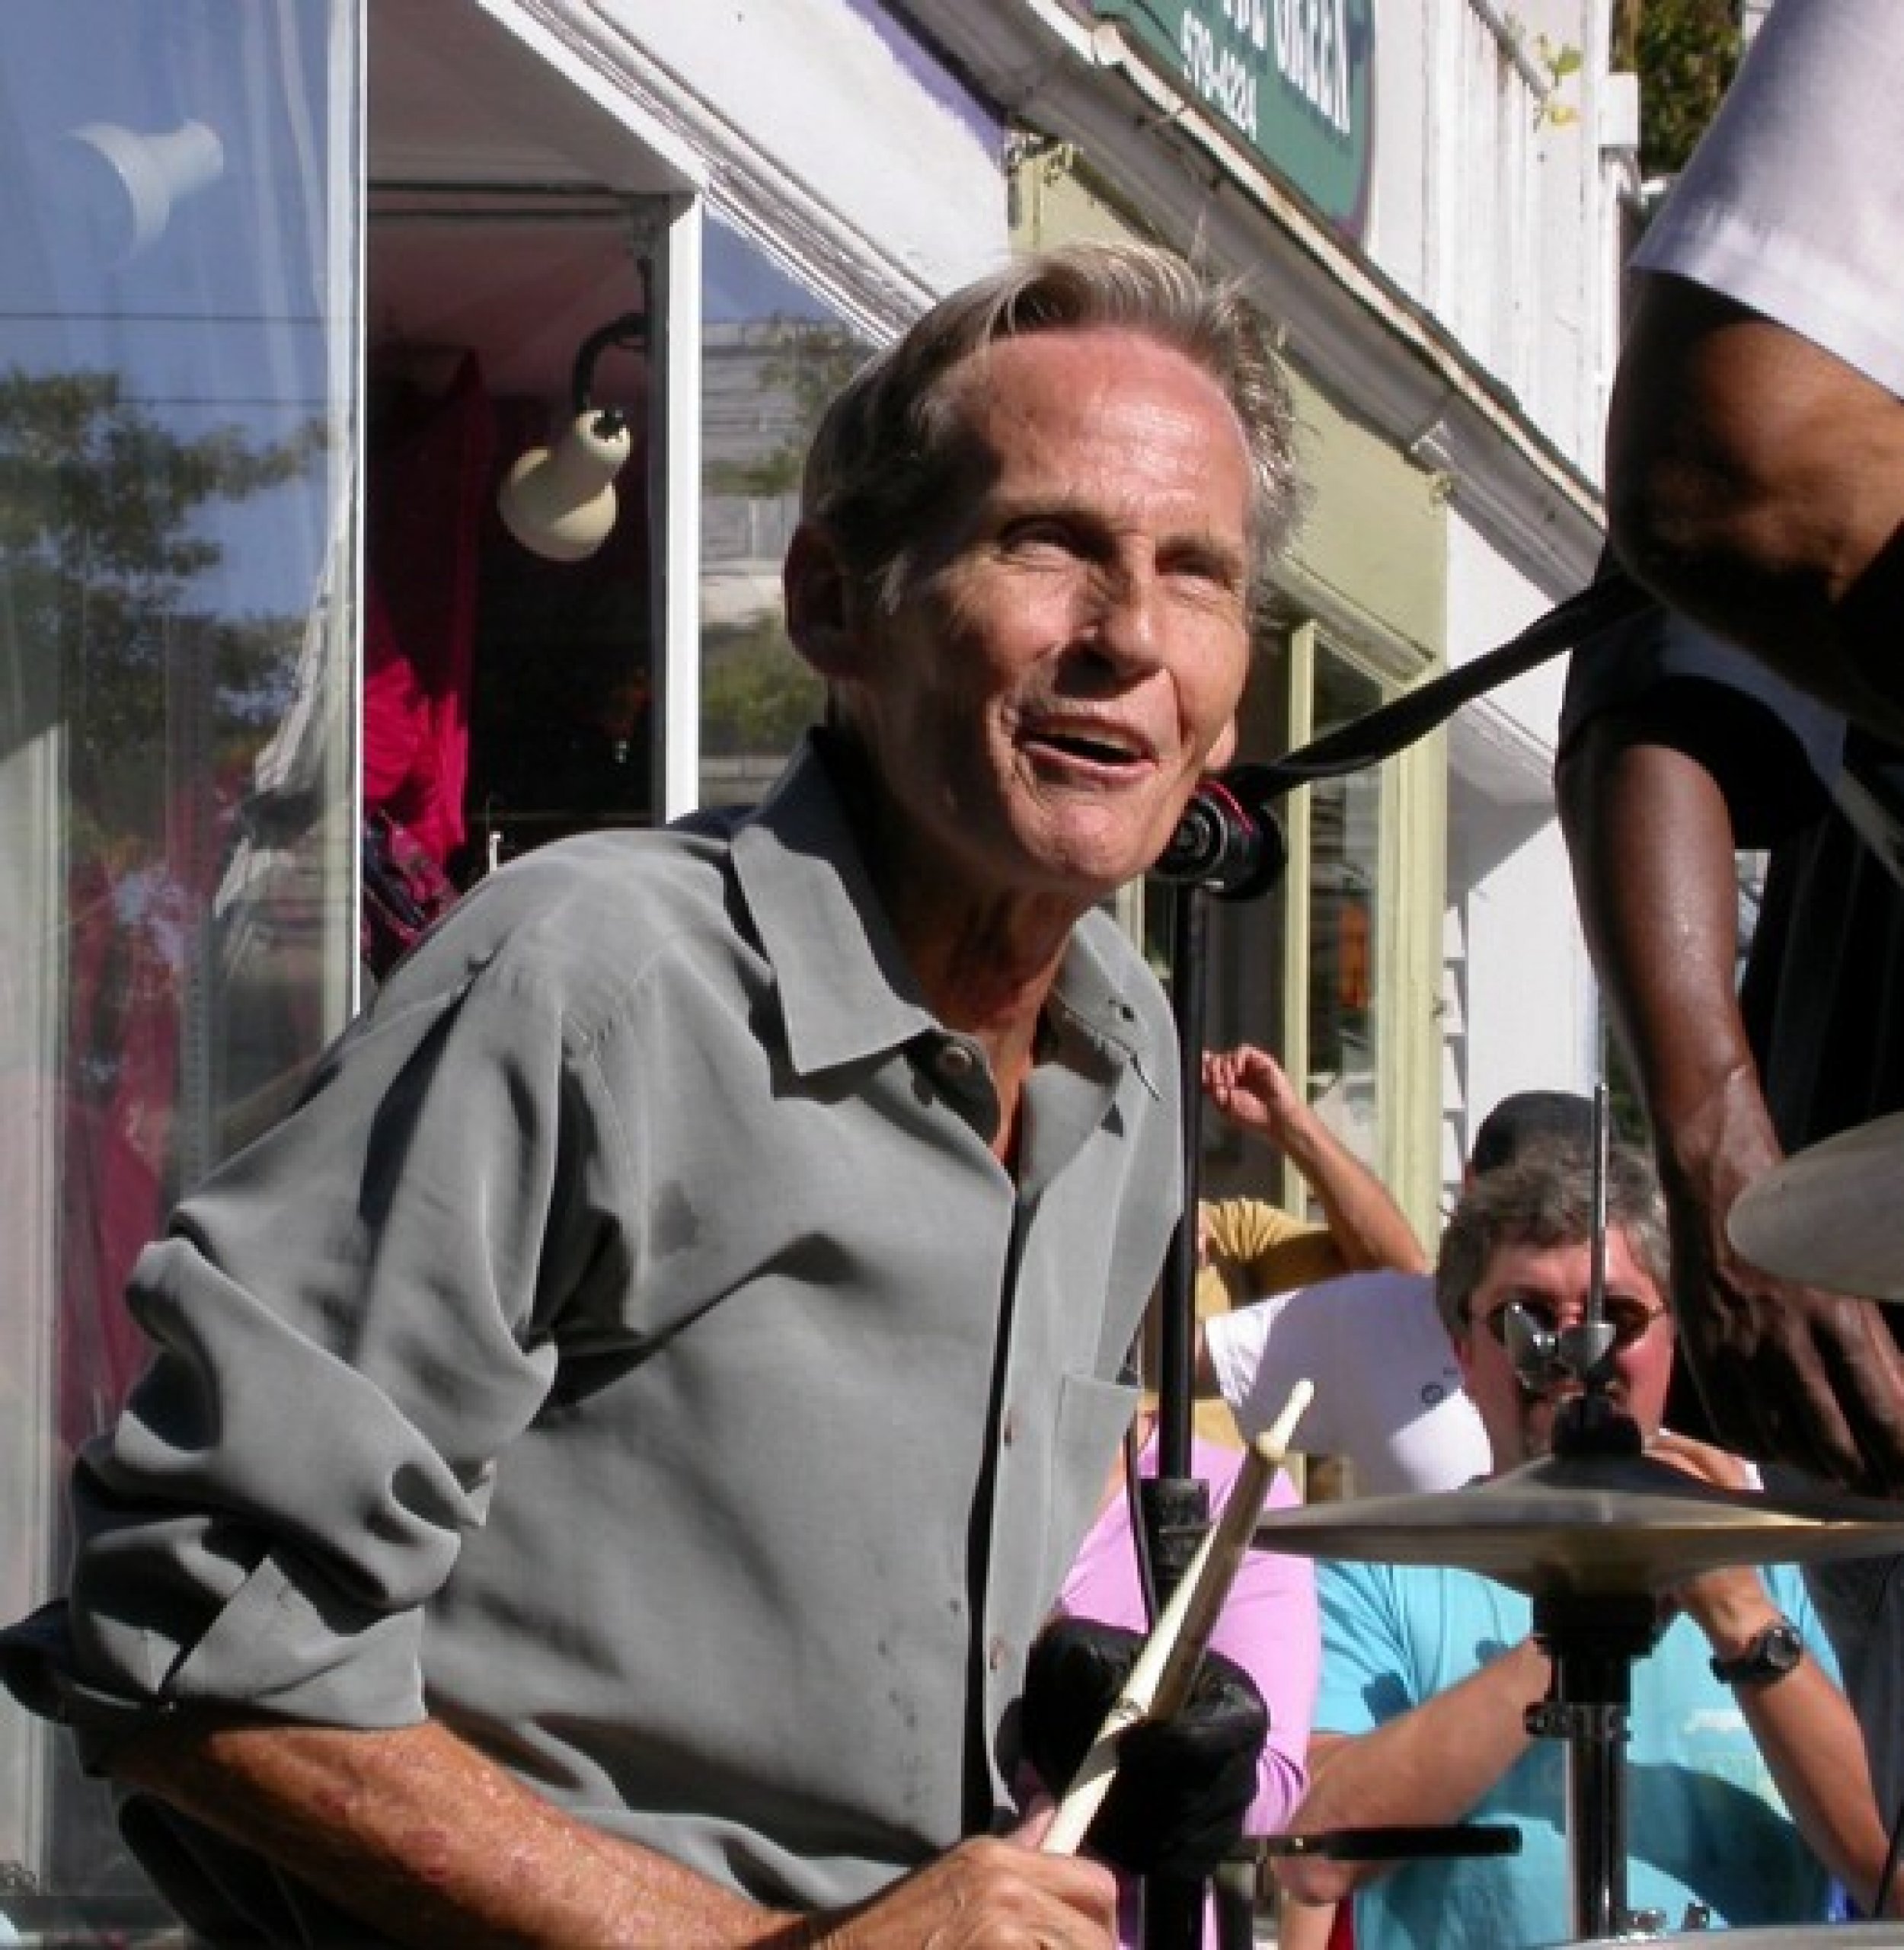 Levon Helm In Final Stages Of Cancer Battle Best Video Clips, Twitter Reactions